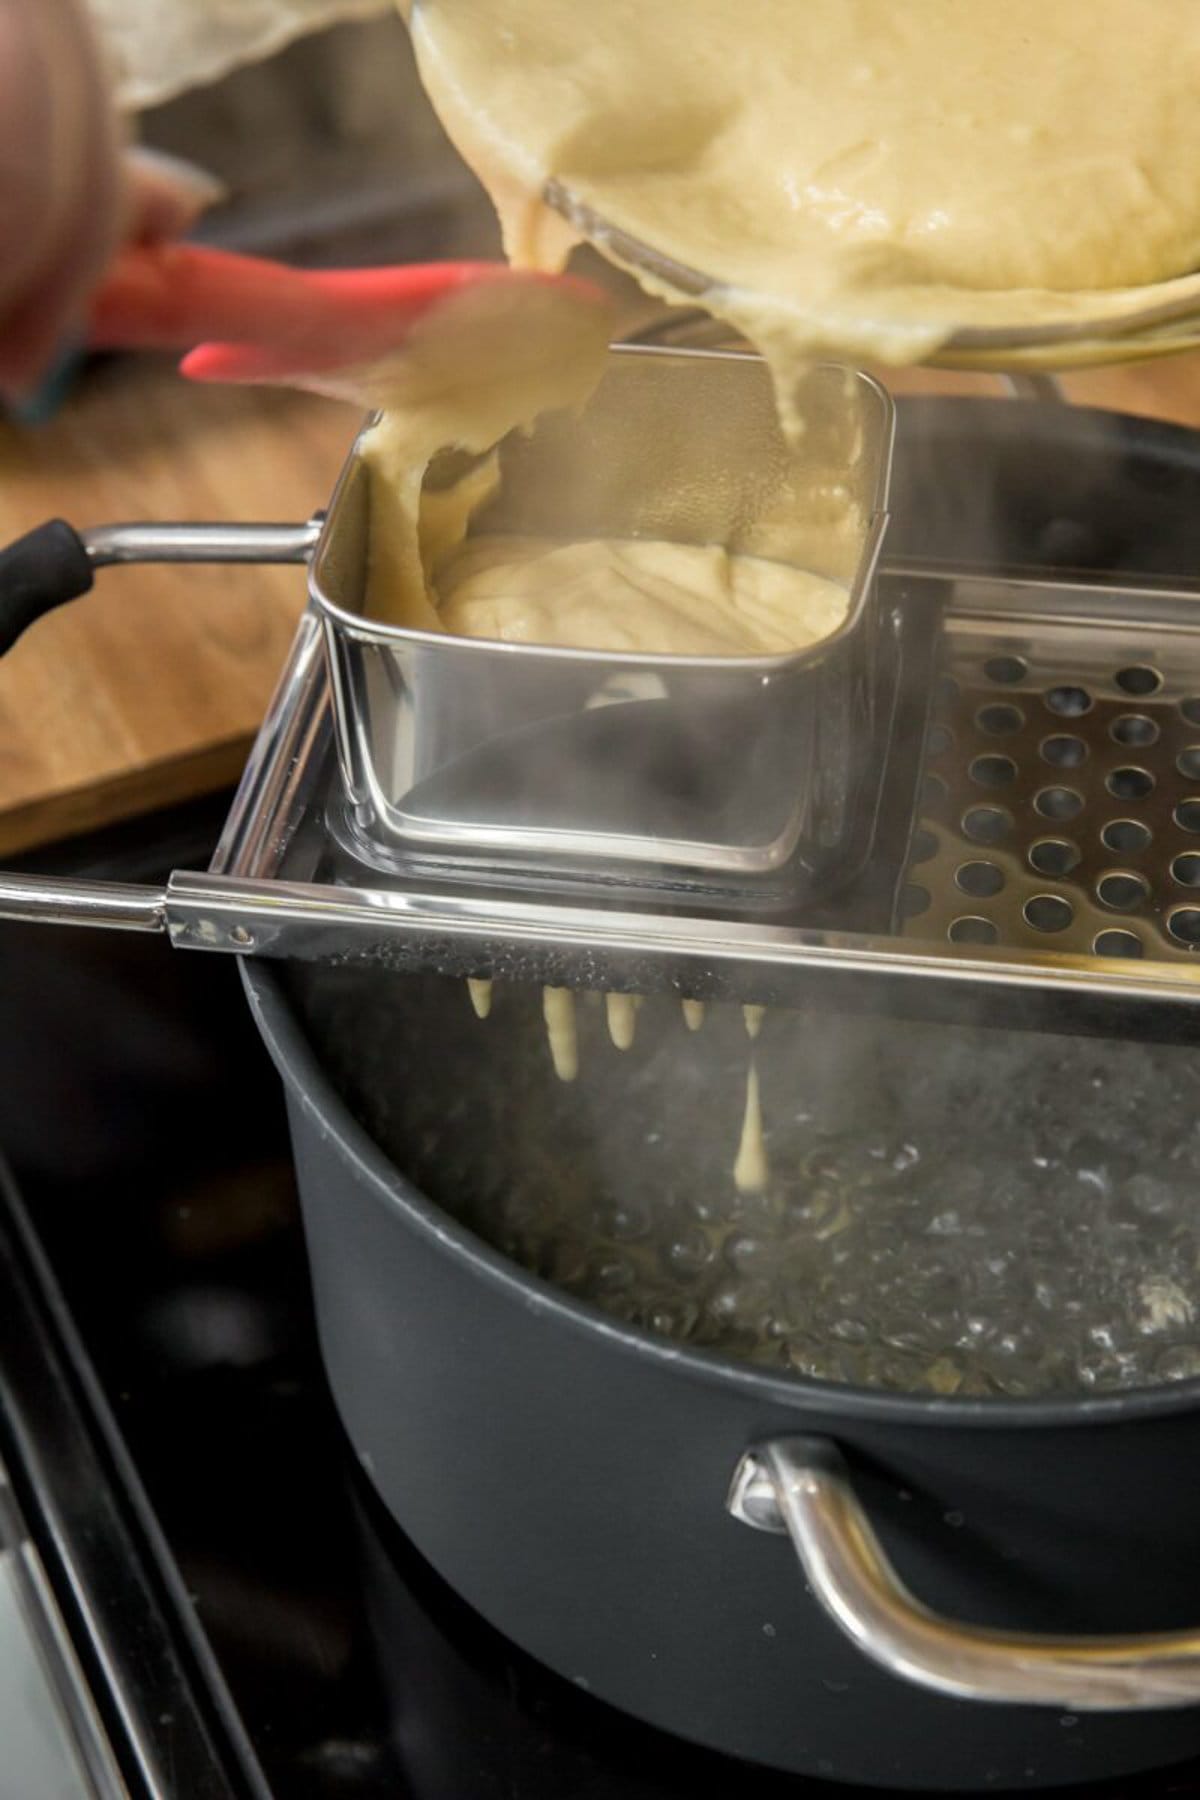 Spaetzle batter poured into a spaetzle maker over a pot of boiling water.